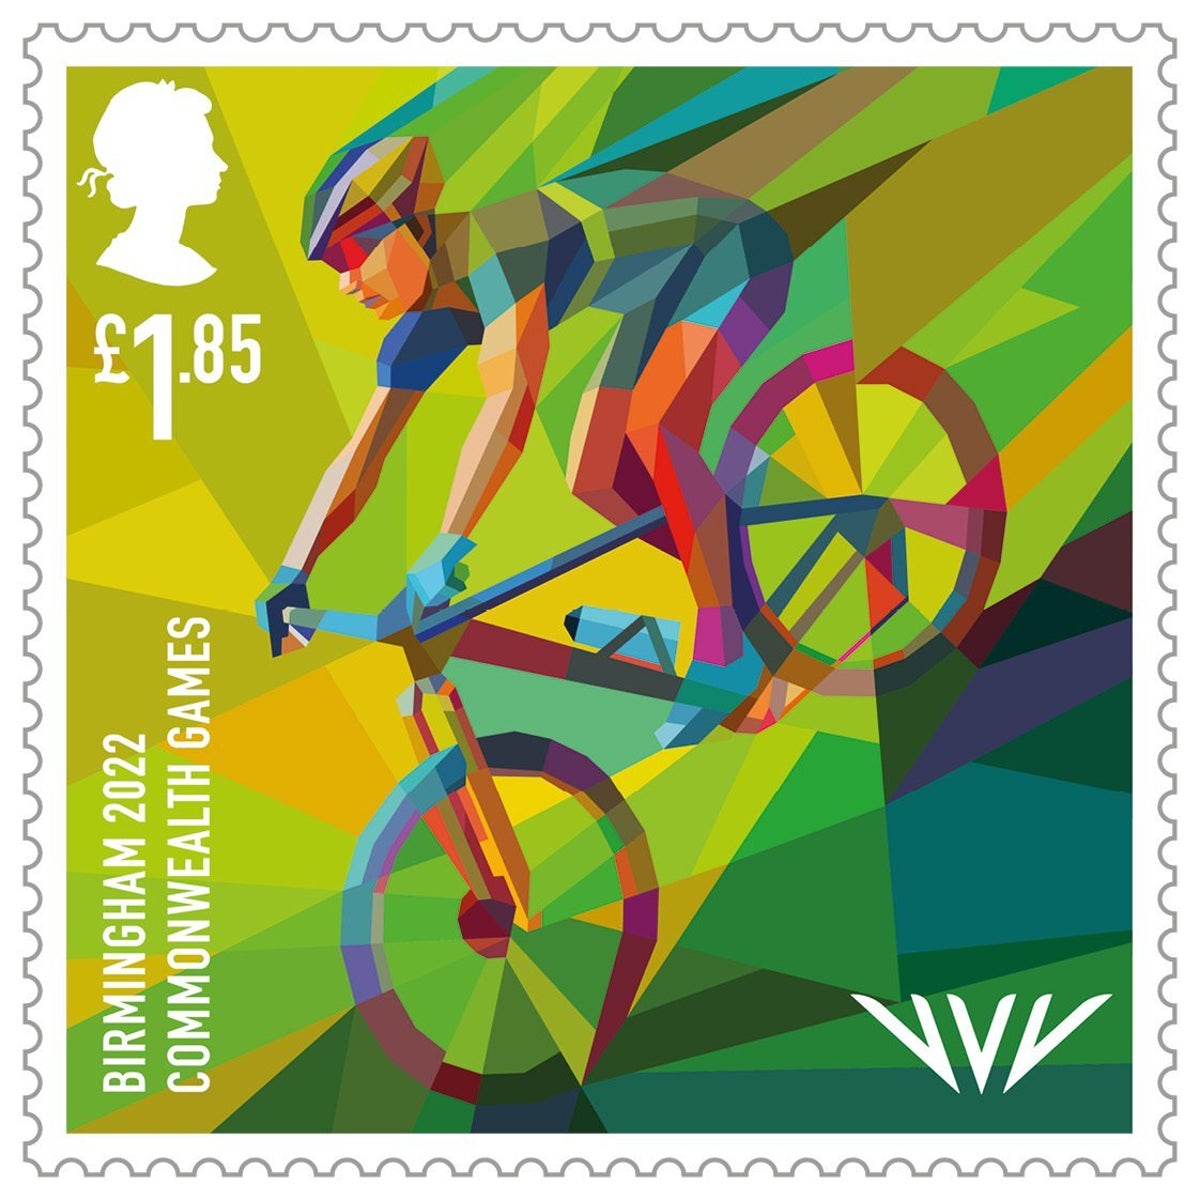 New Royal Mail stamps to commemorate the Commonwealth Games